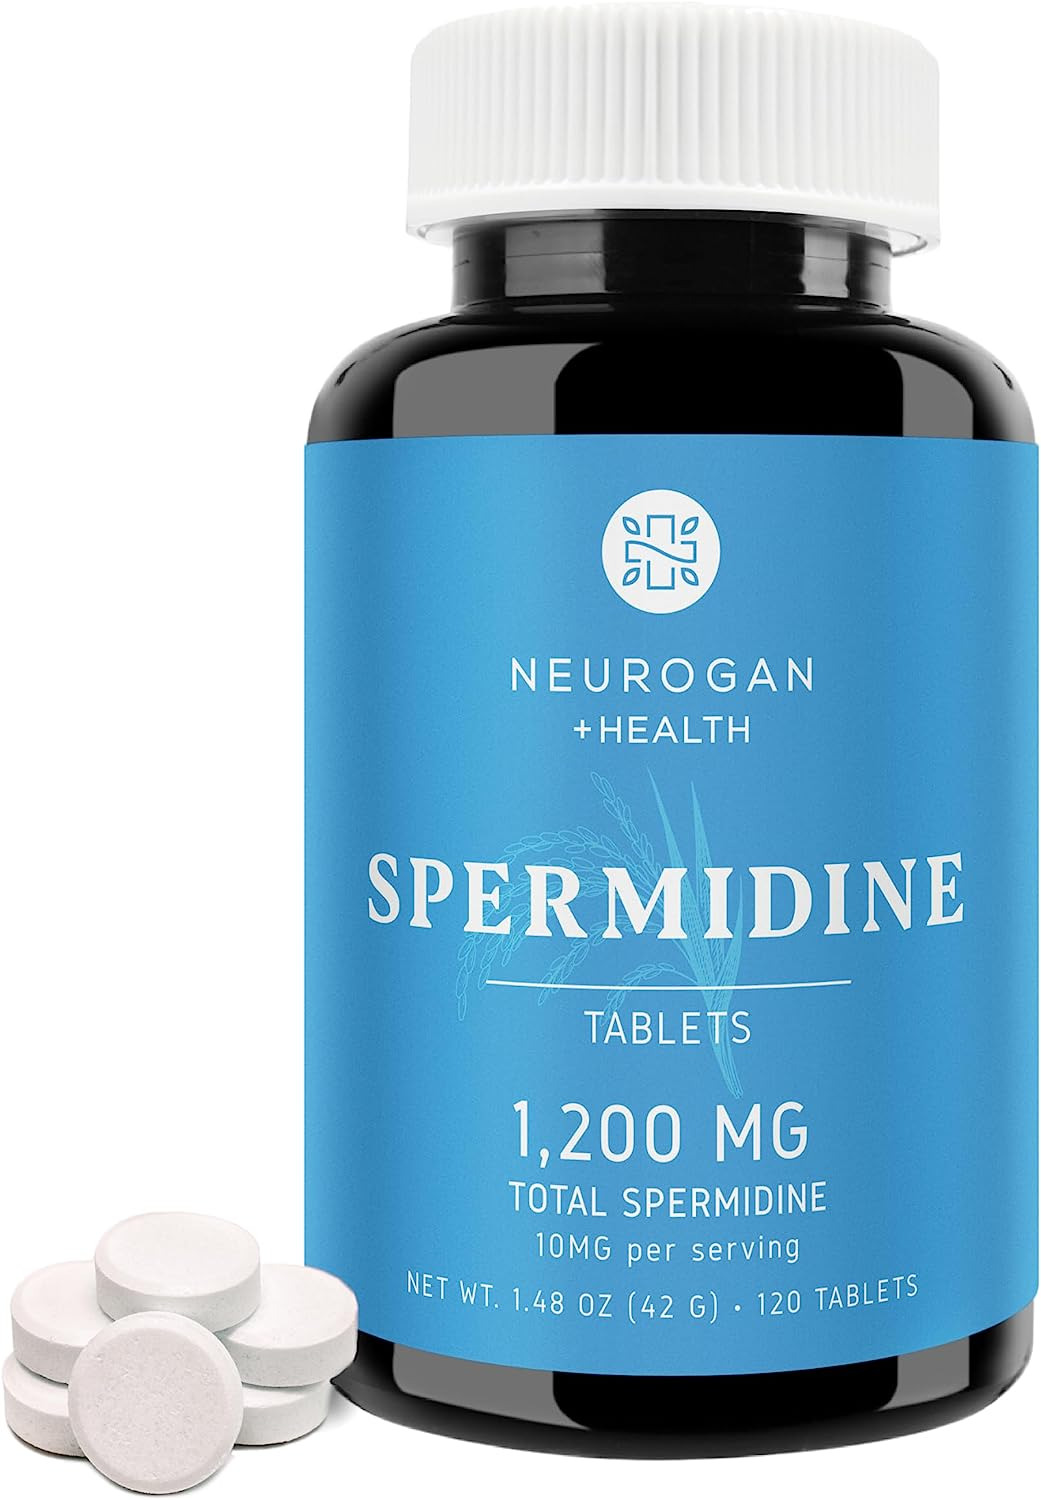 Spermidine Supplement - 1200Mg - 99% Pure 100X More Potent than Rice & Wheat Ger